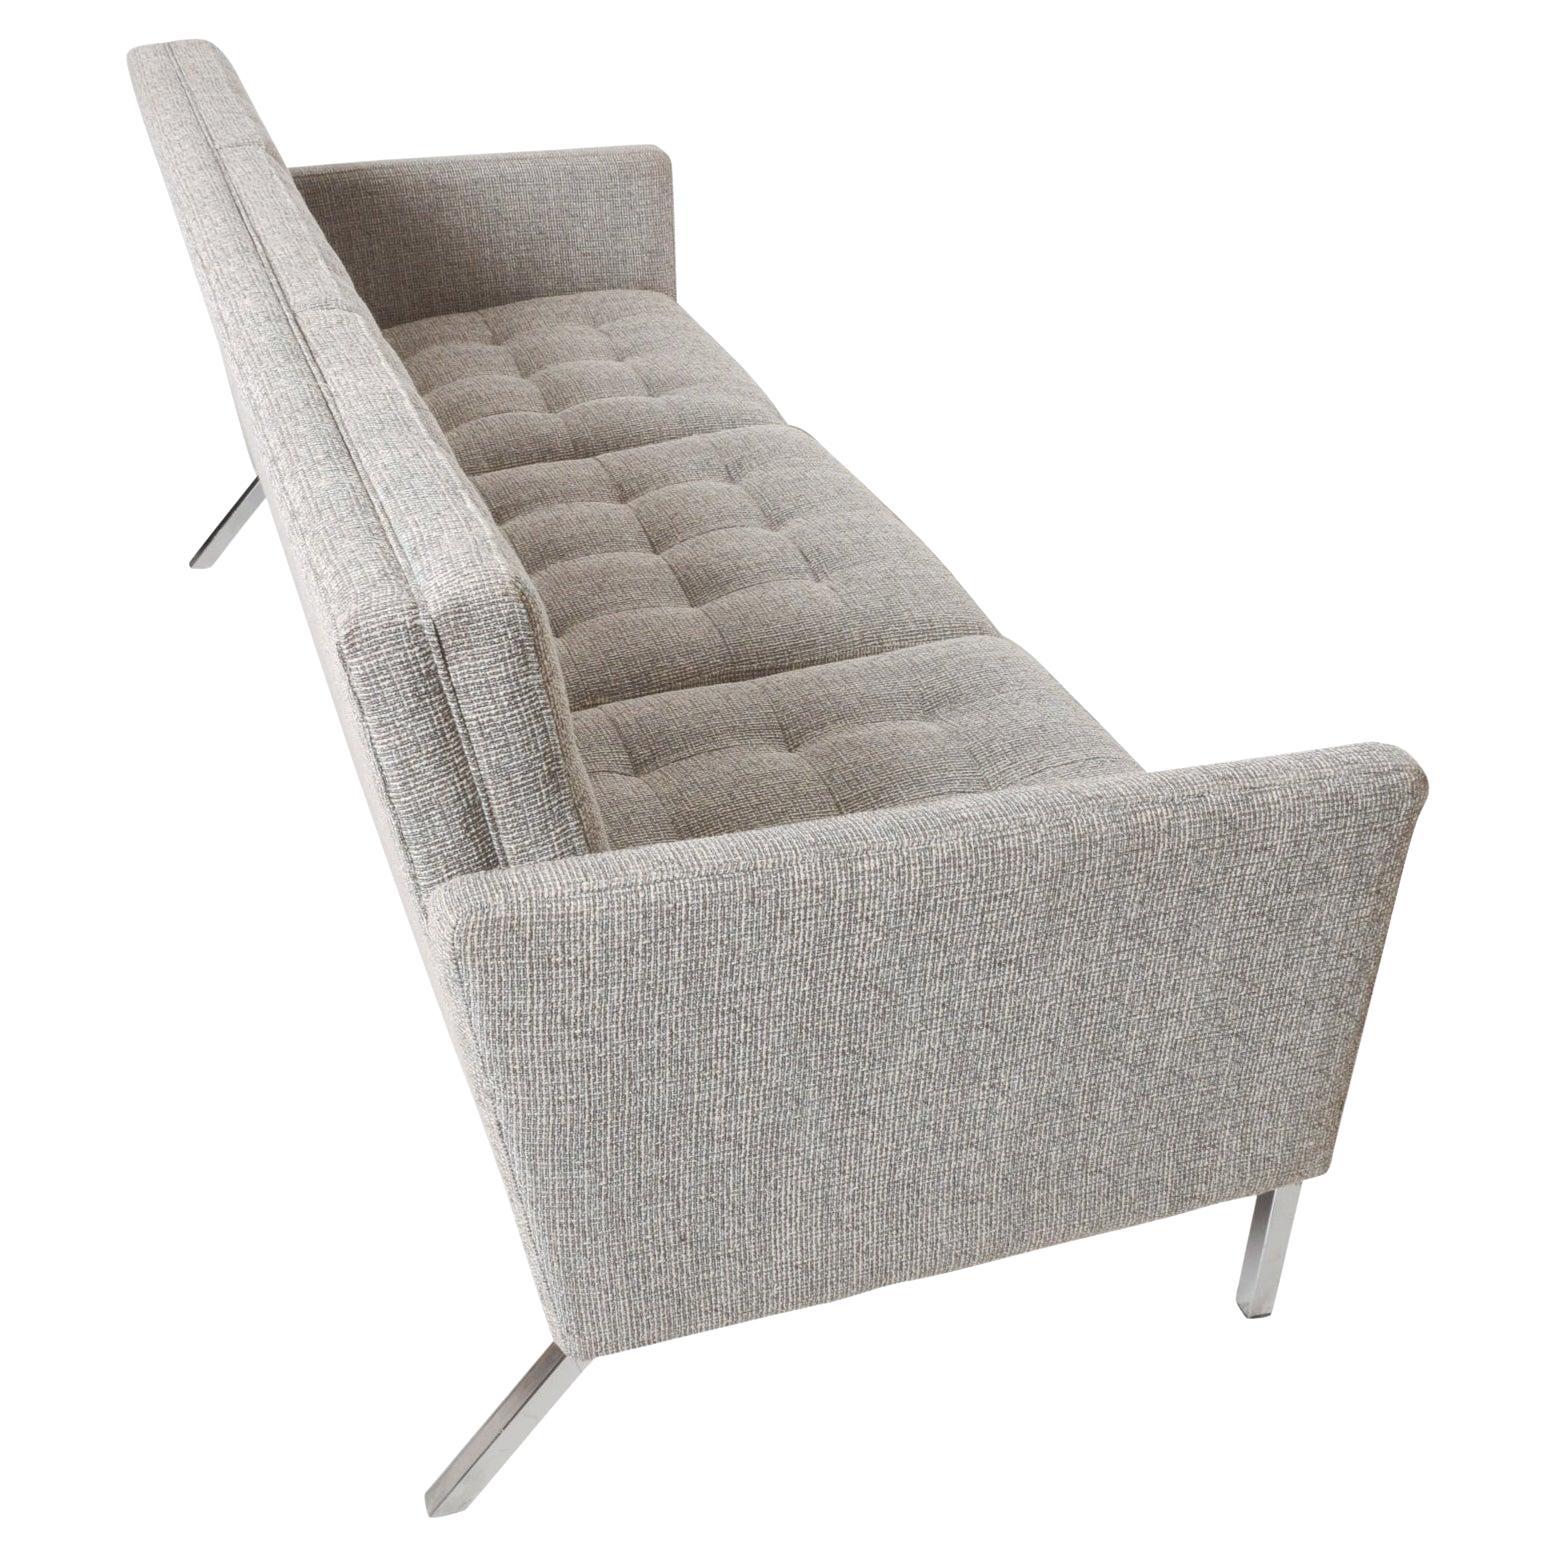 Sofa by Steelcase in the style of Florence Knoll, circa 1950s
Classic Sofa tuxedo button tufted three-seater design.
Chrome base with rear angled legs.
No label remains.
Measures: 76 W x 31.5 D x 31